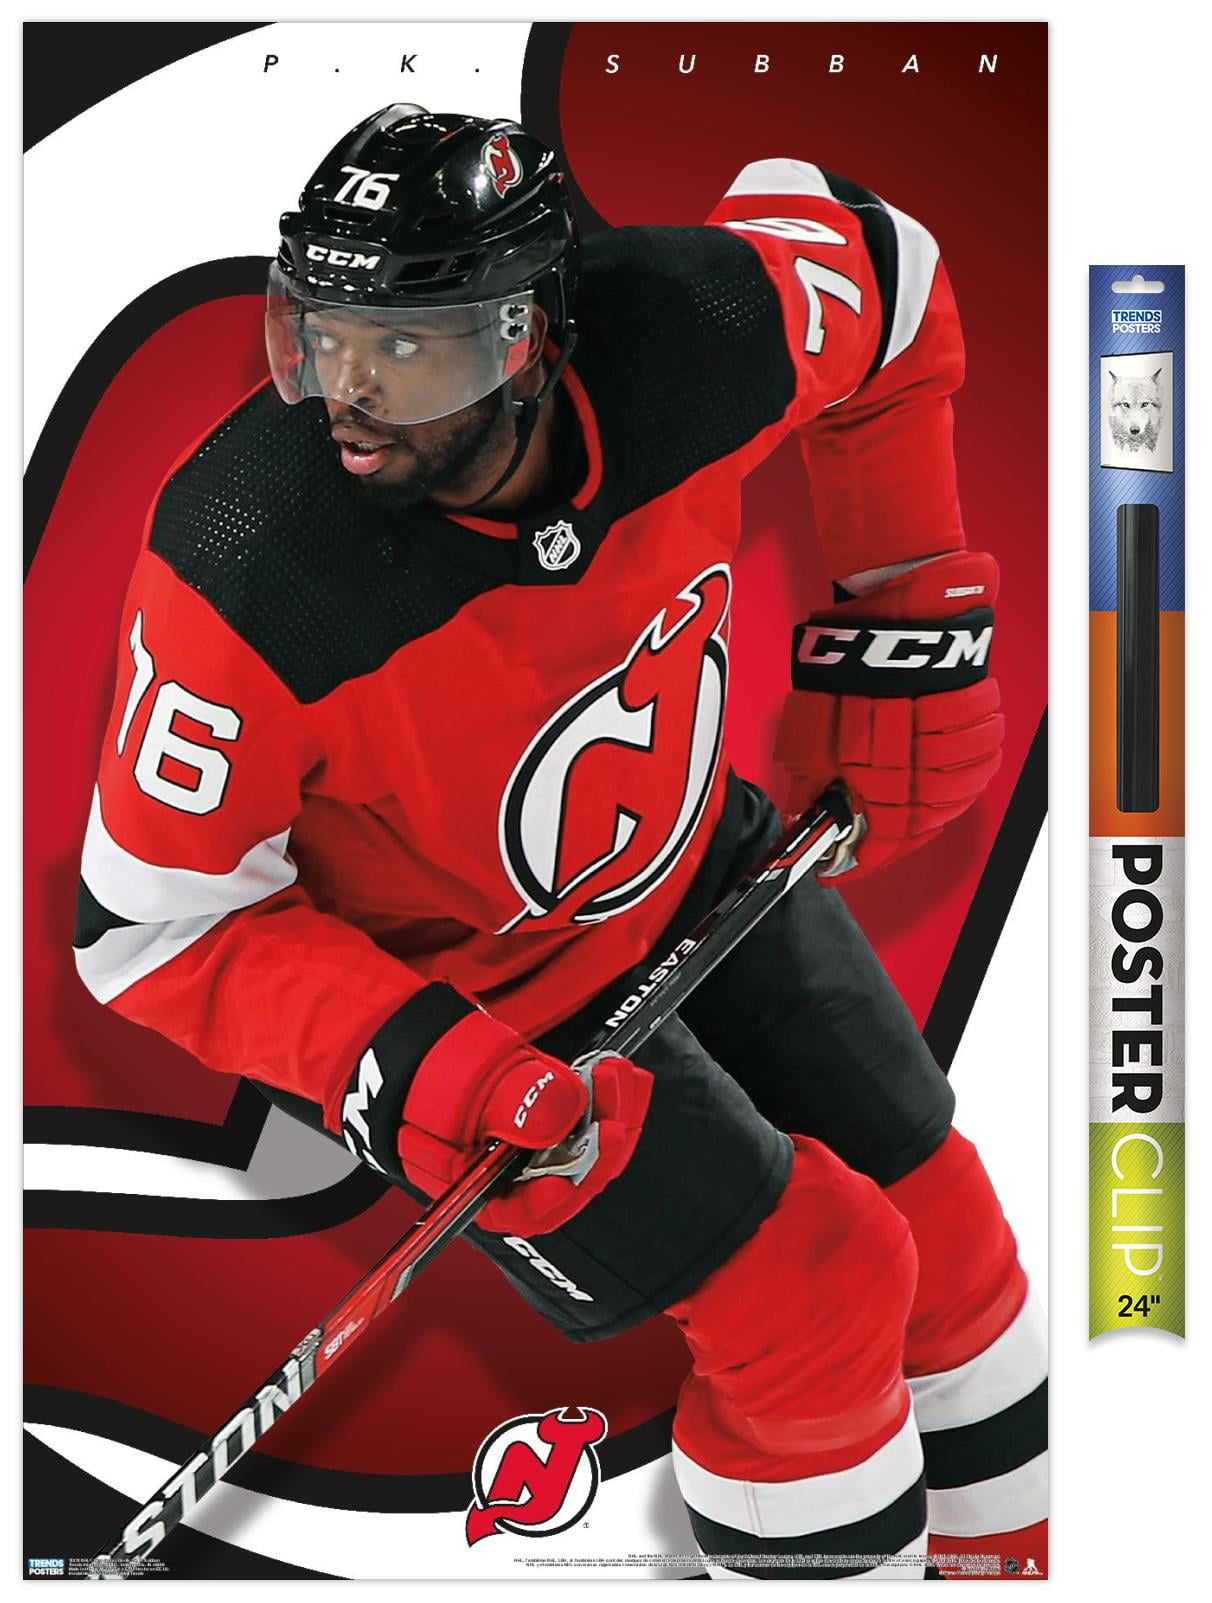 new jersey devils poster